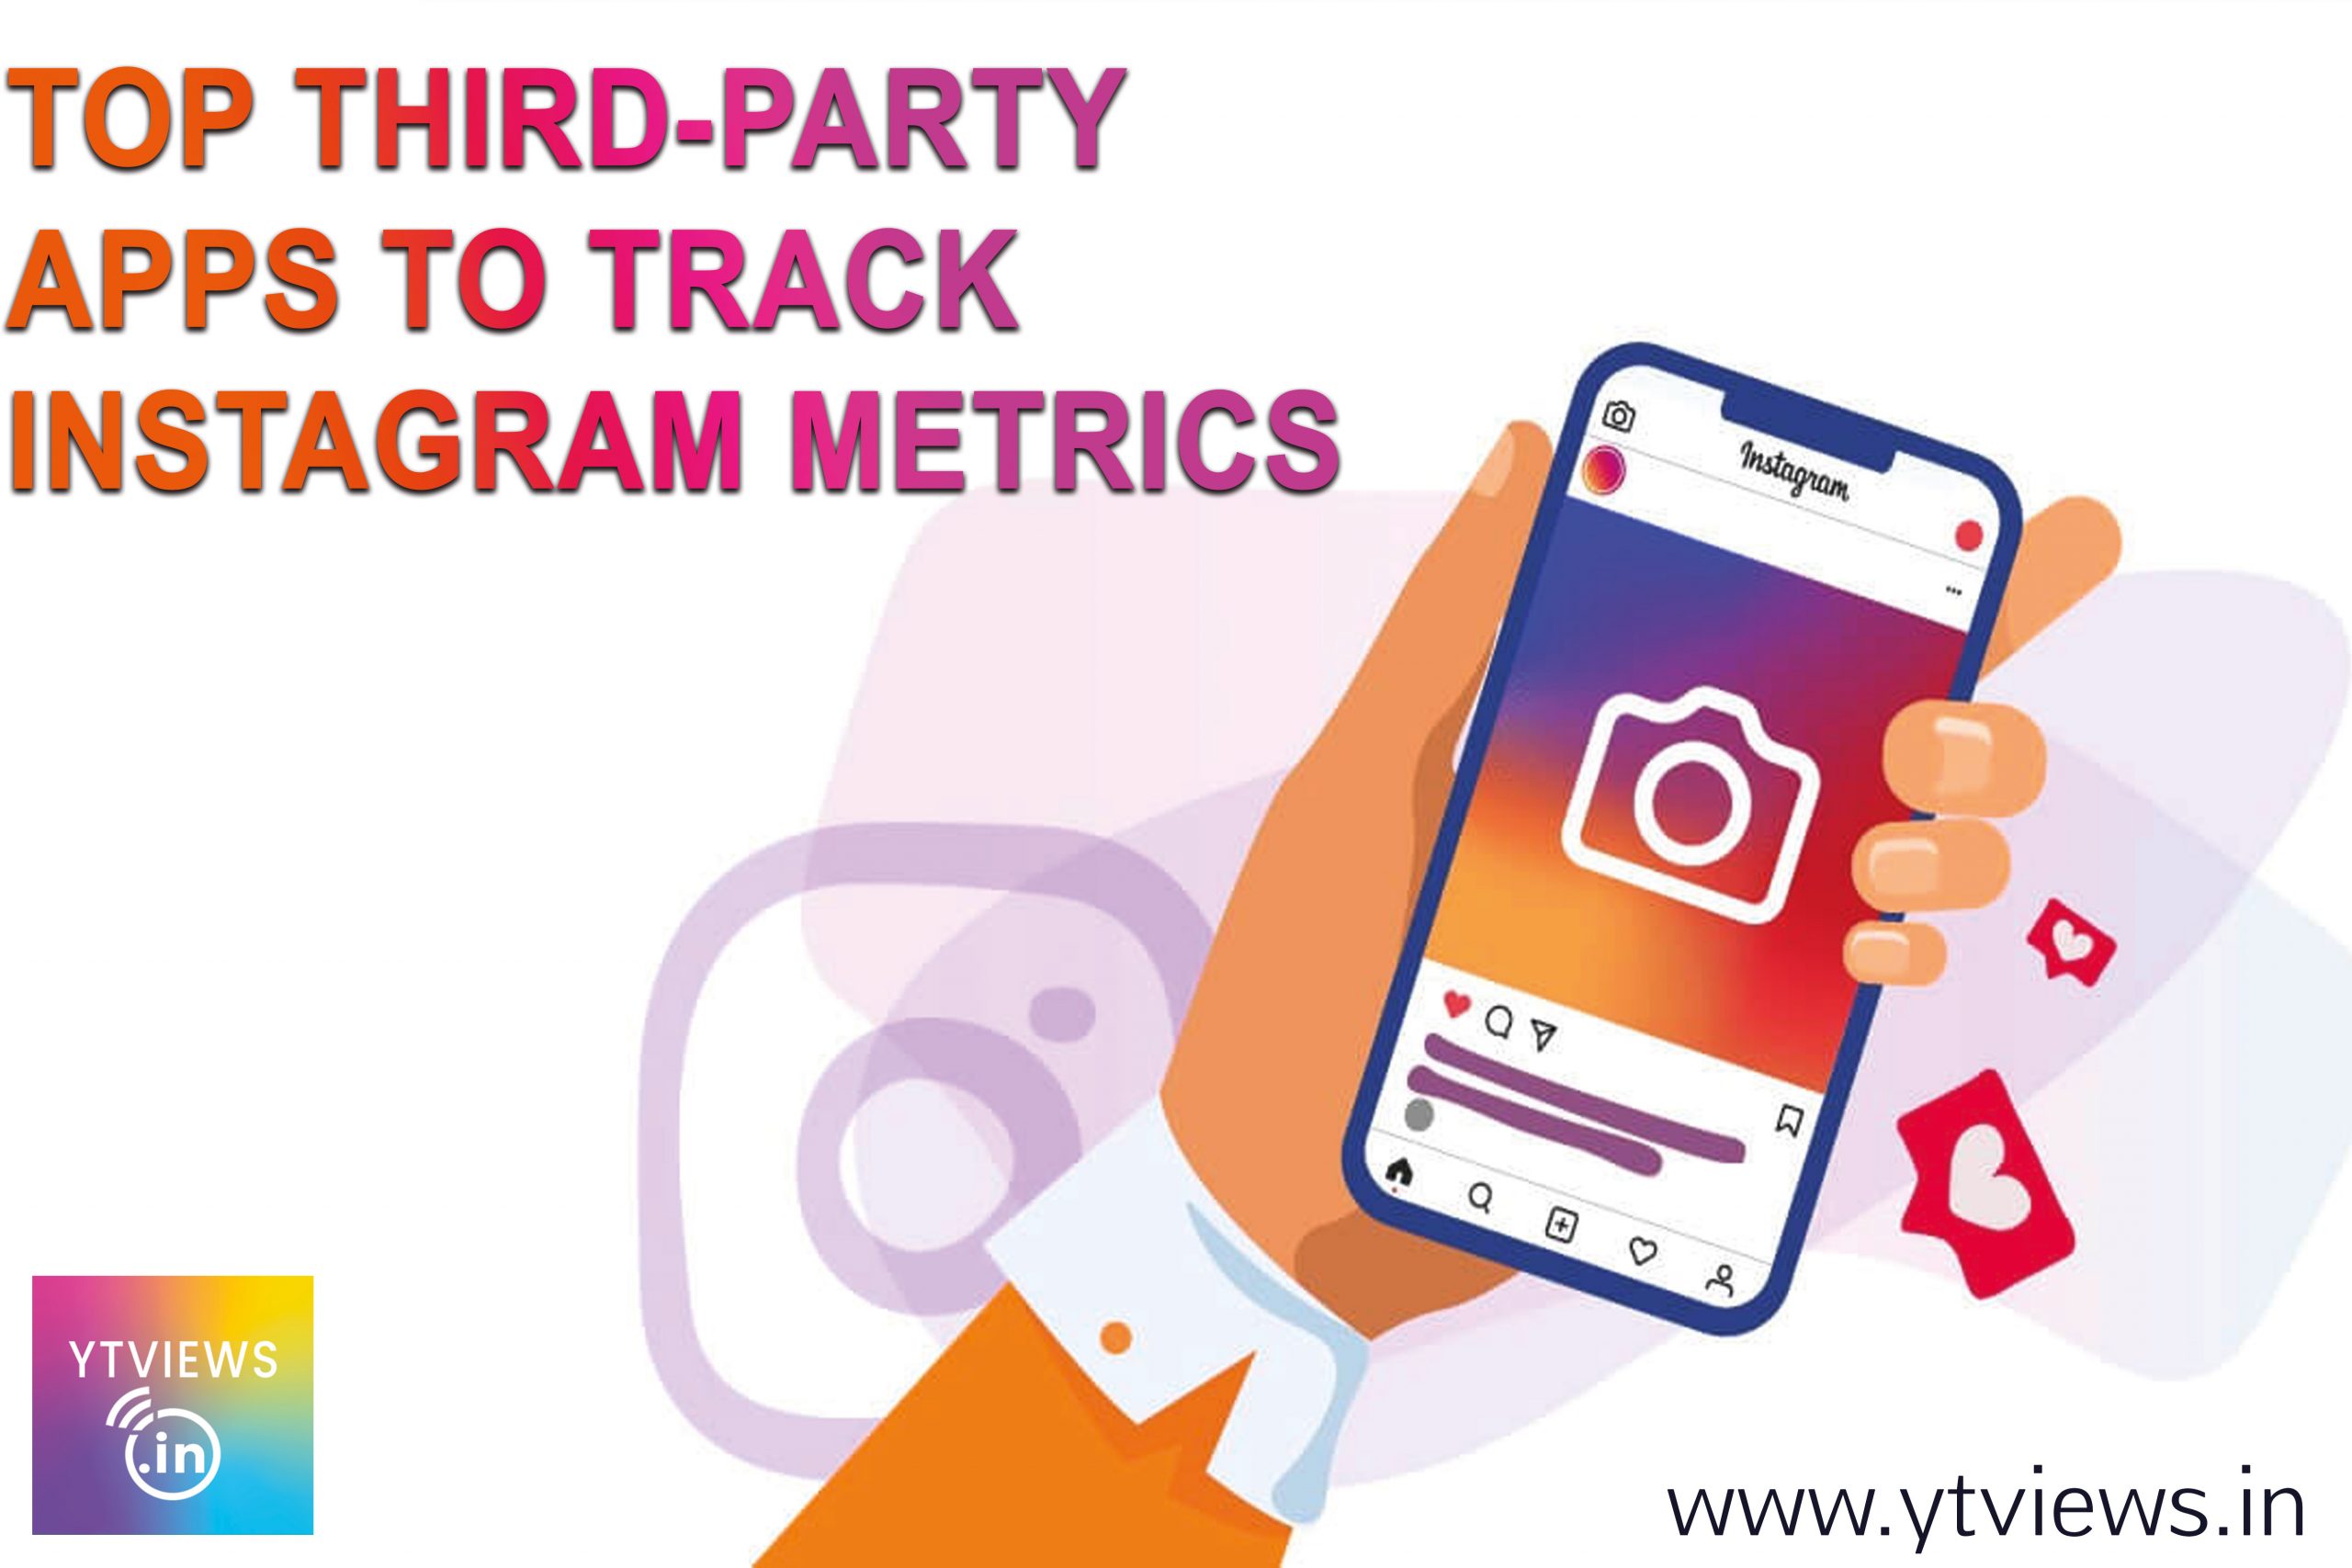 Top third-party apps to track Instagram metrics.